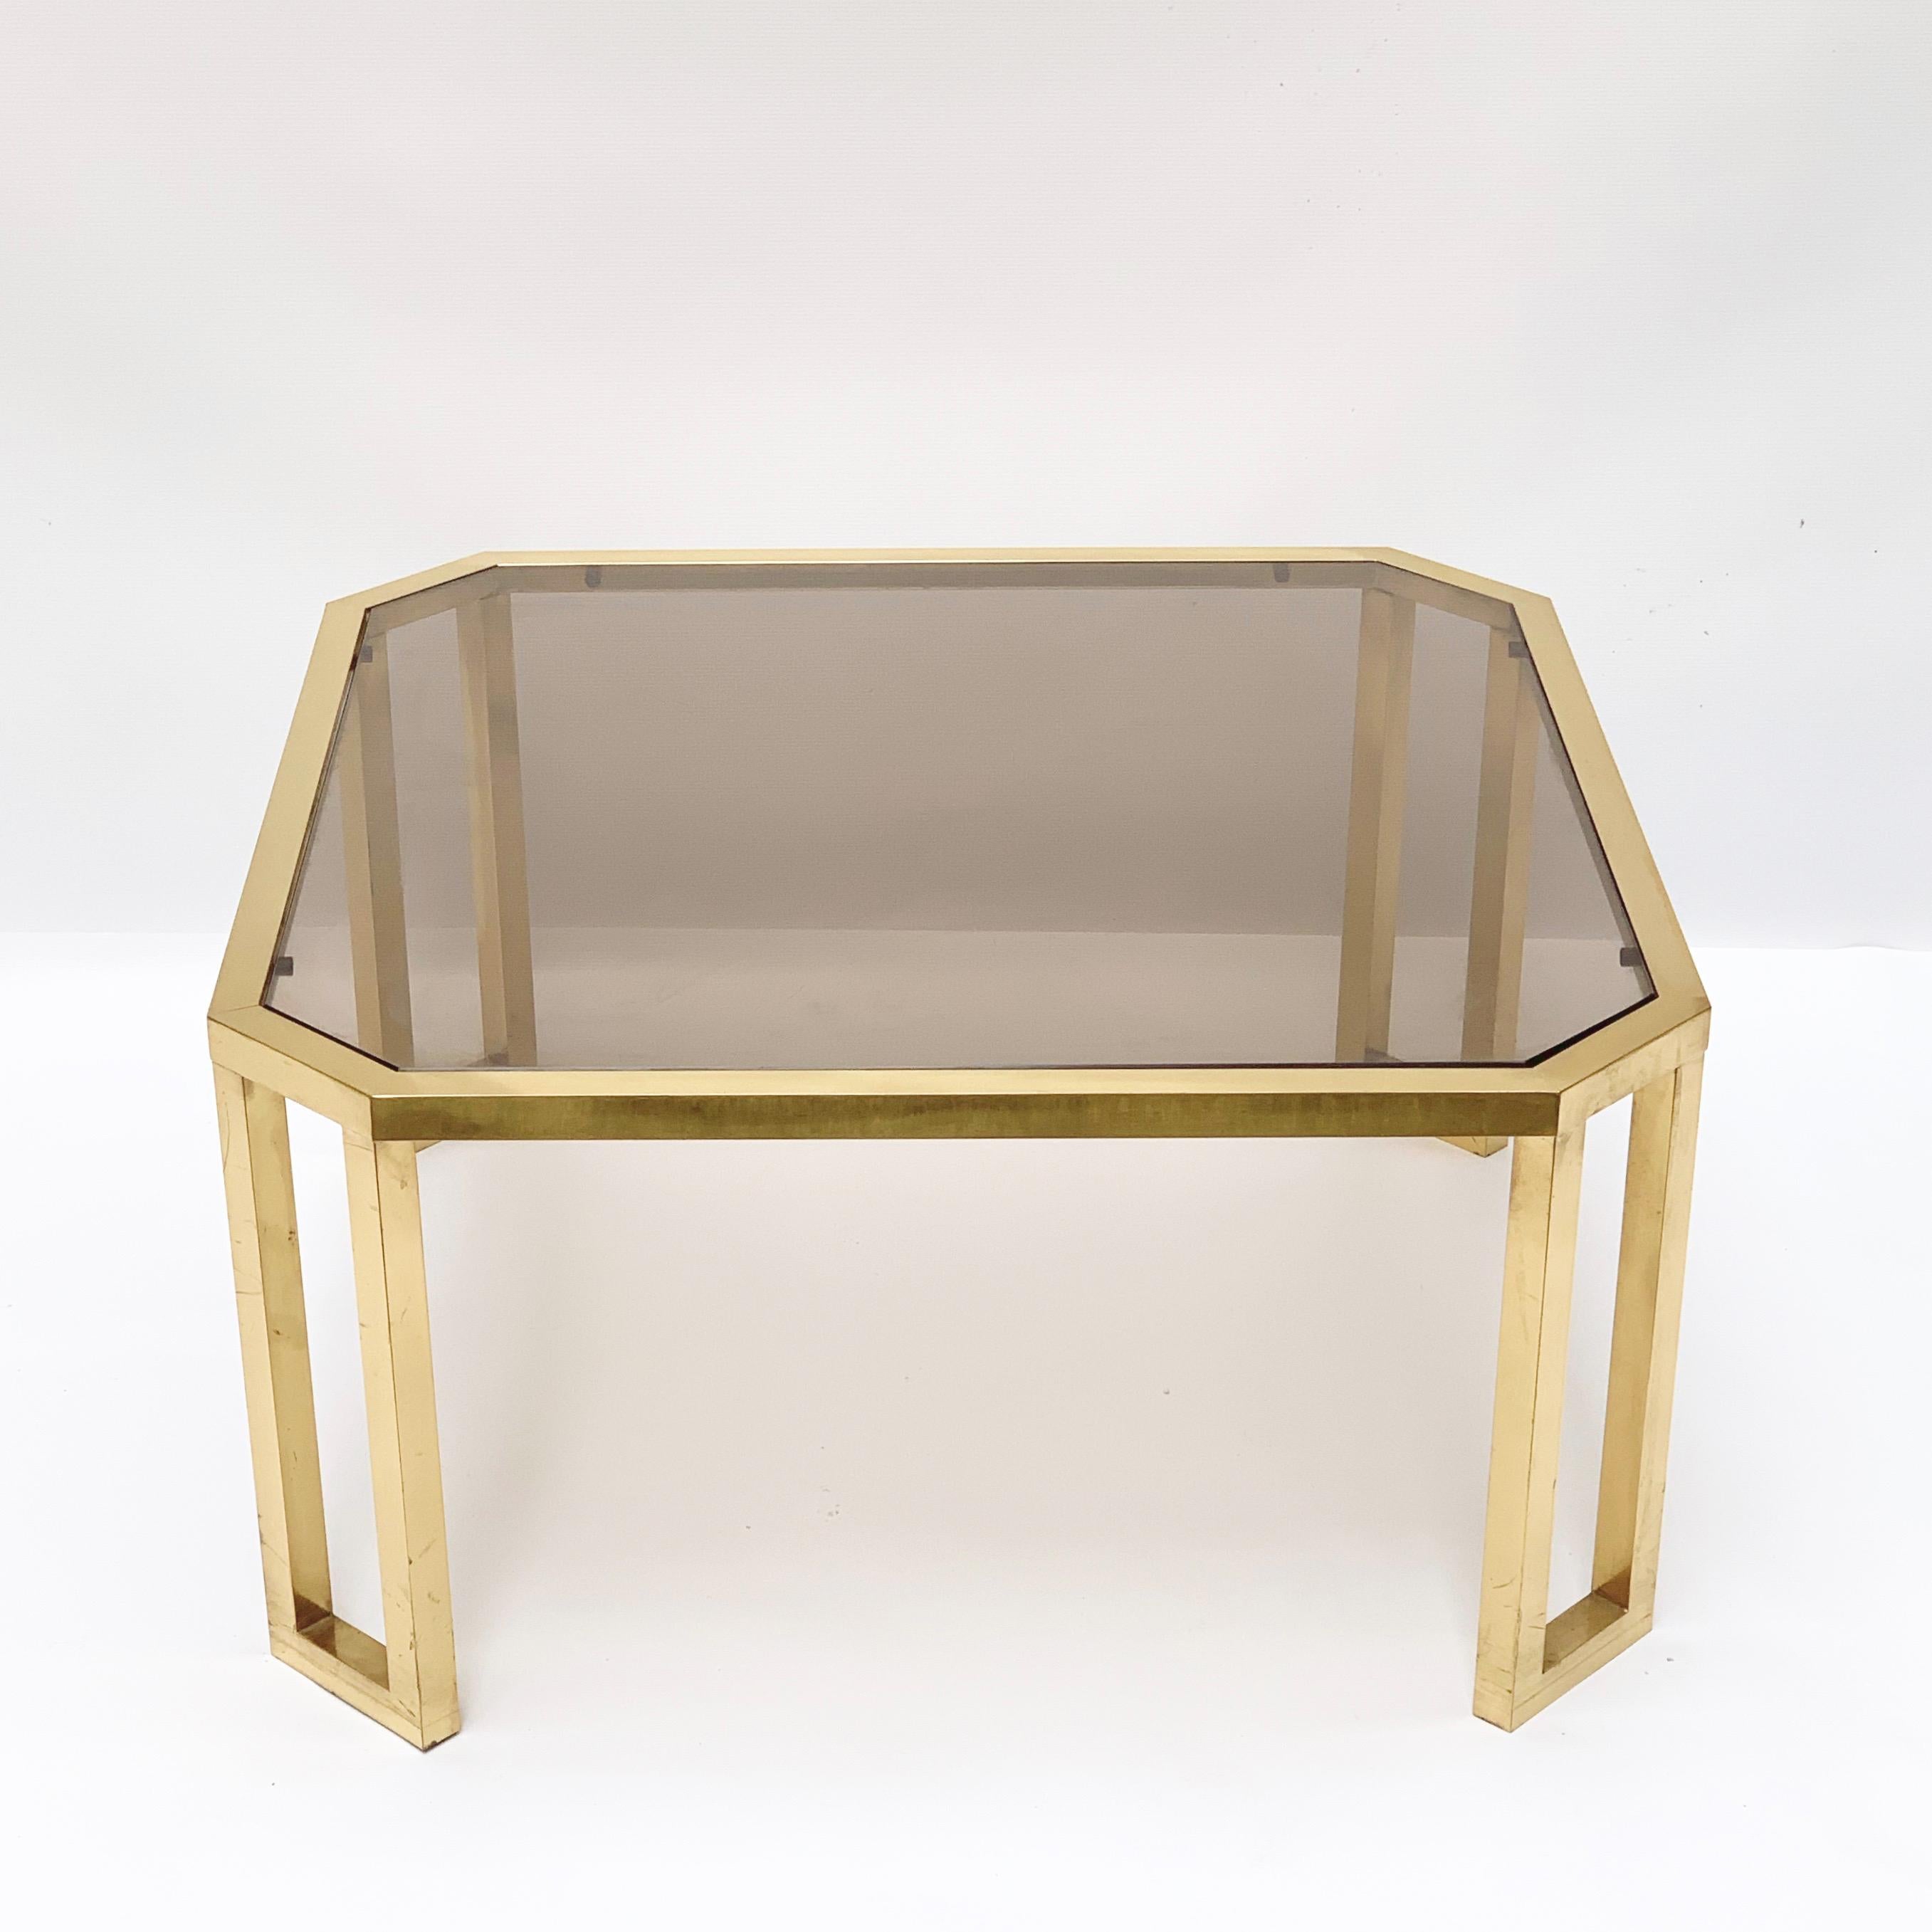 Maison Jansen Octagonal Tables in Brass and Glass, France, 1970s Coffee Tables In Fair Condition For Sale In Roma, IT